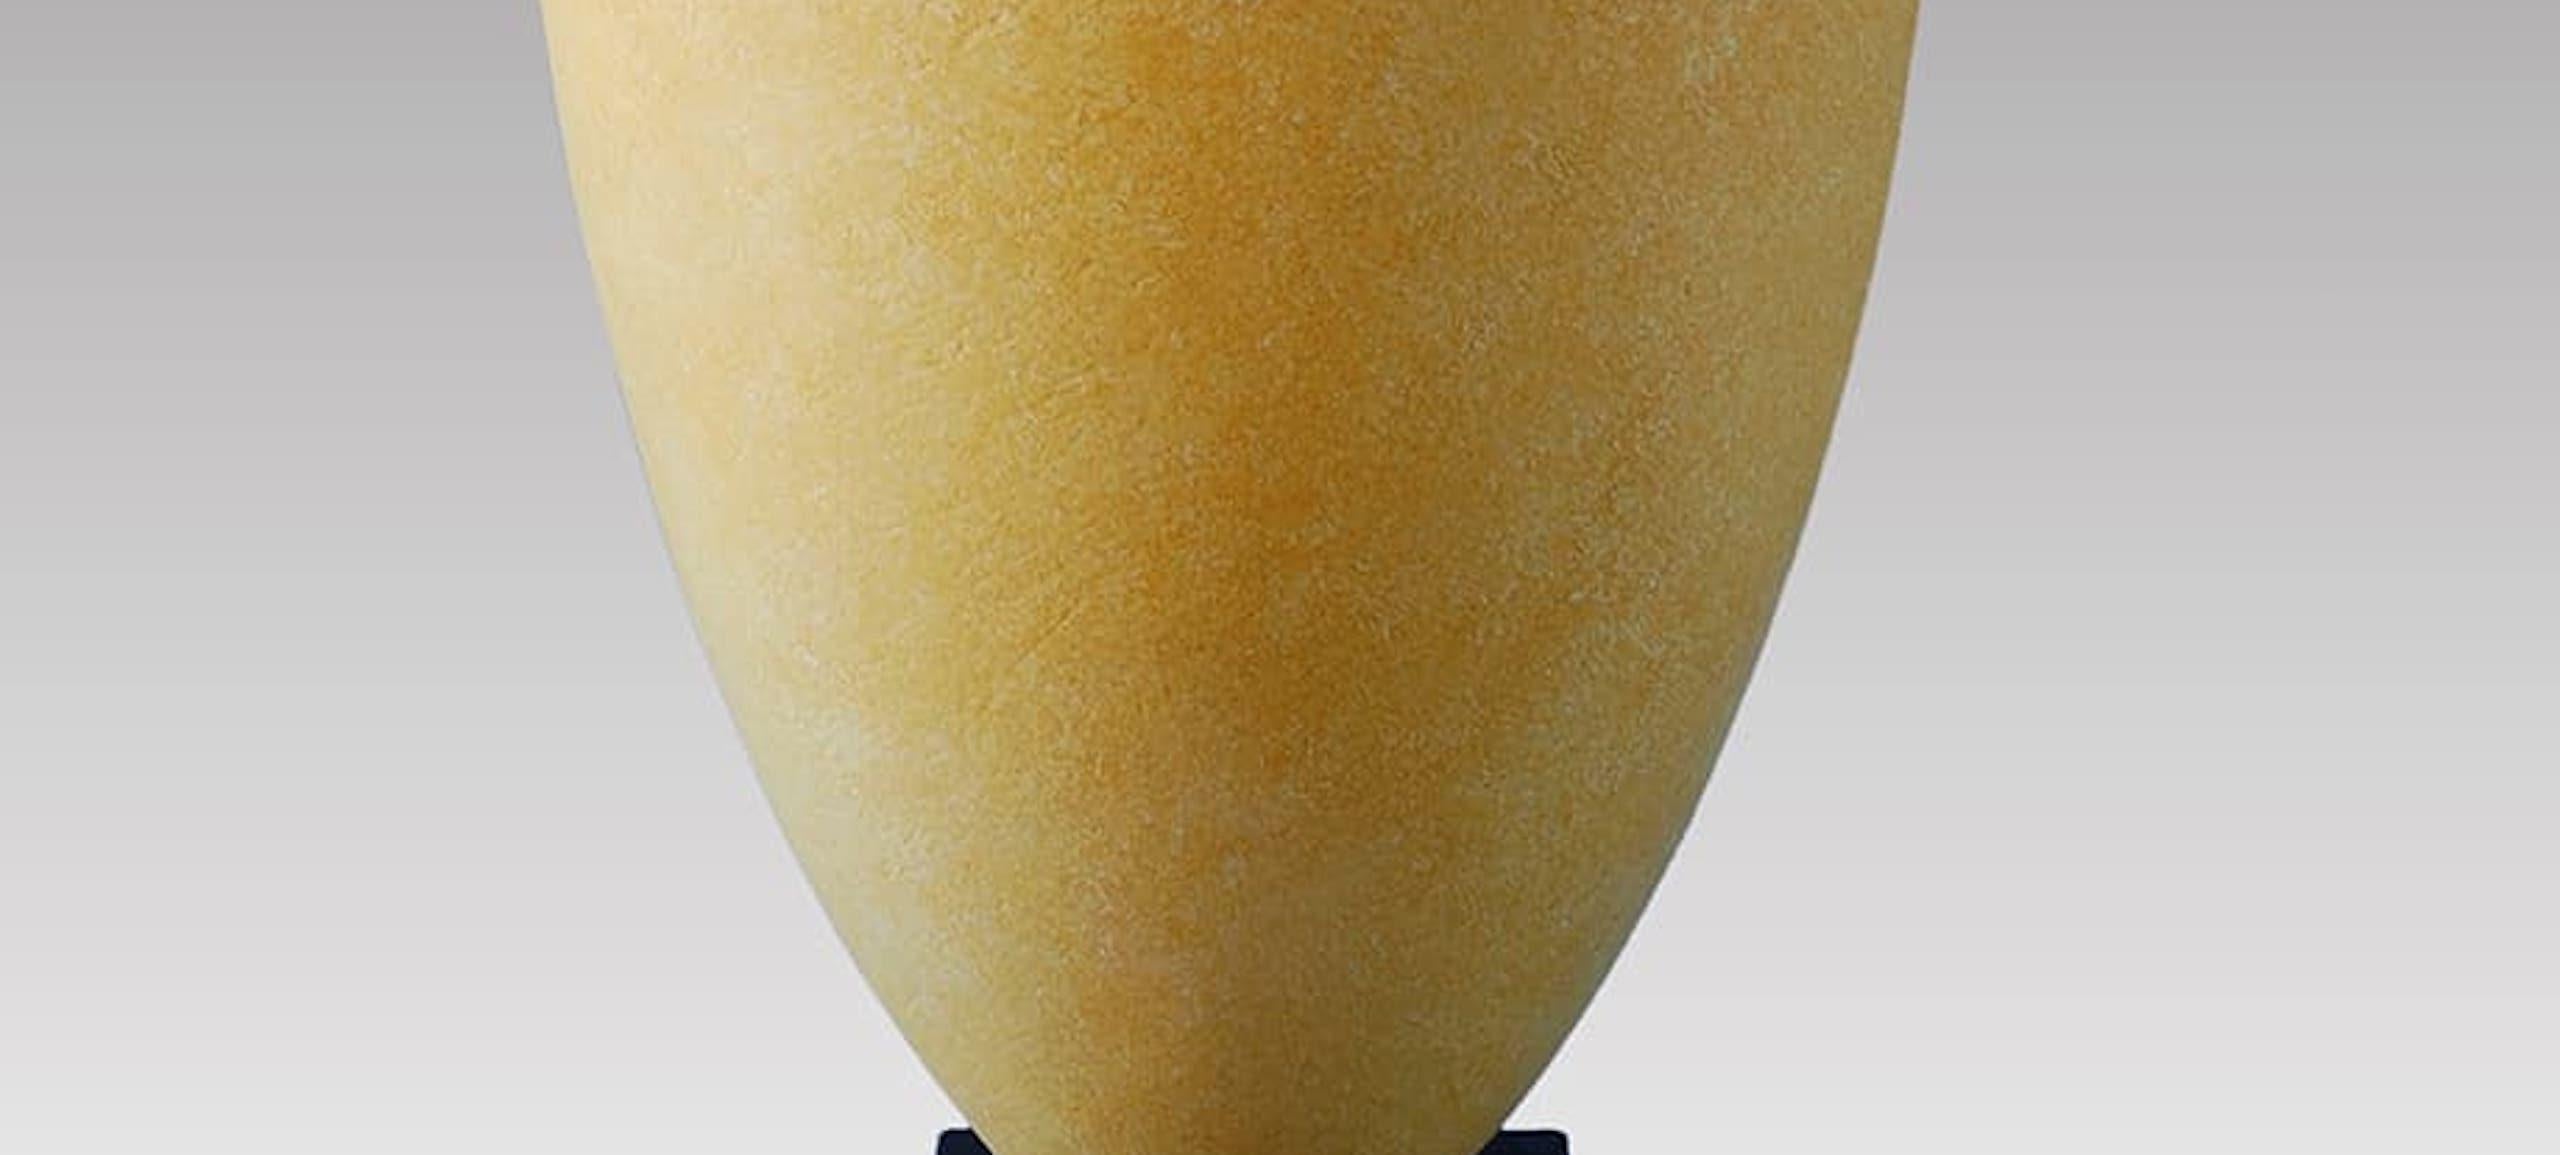 Eternal by Patricia Volk - Abstract ceramic sculpture, painted clay, yellow For Sale 4